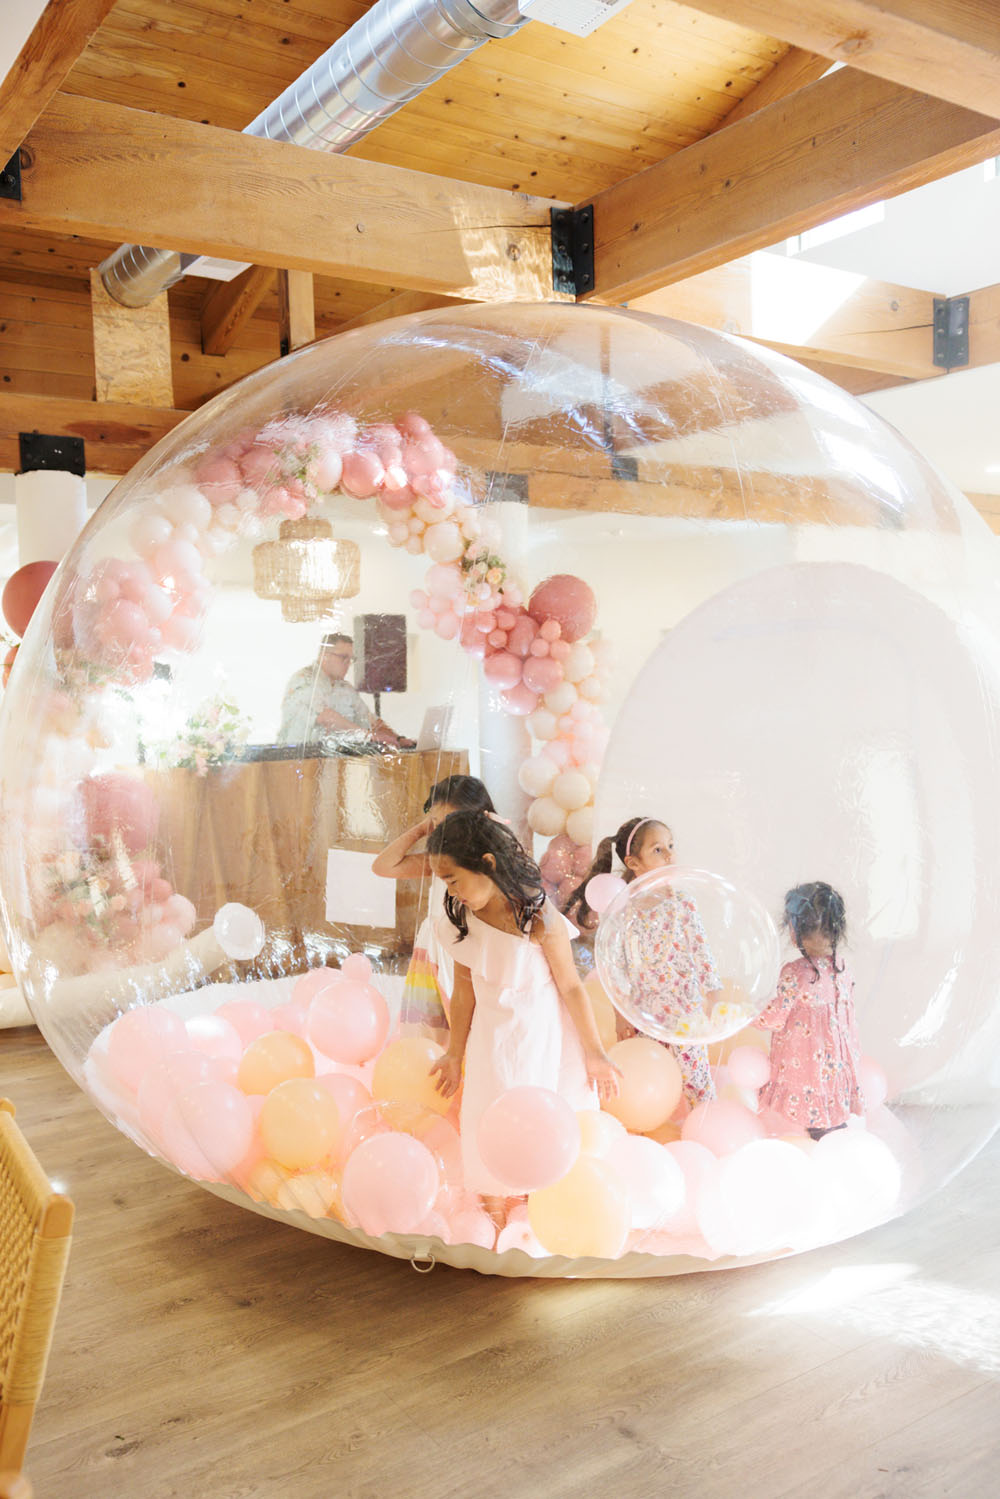 balloon activity for kids party